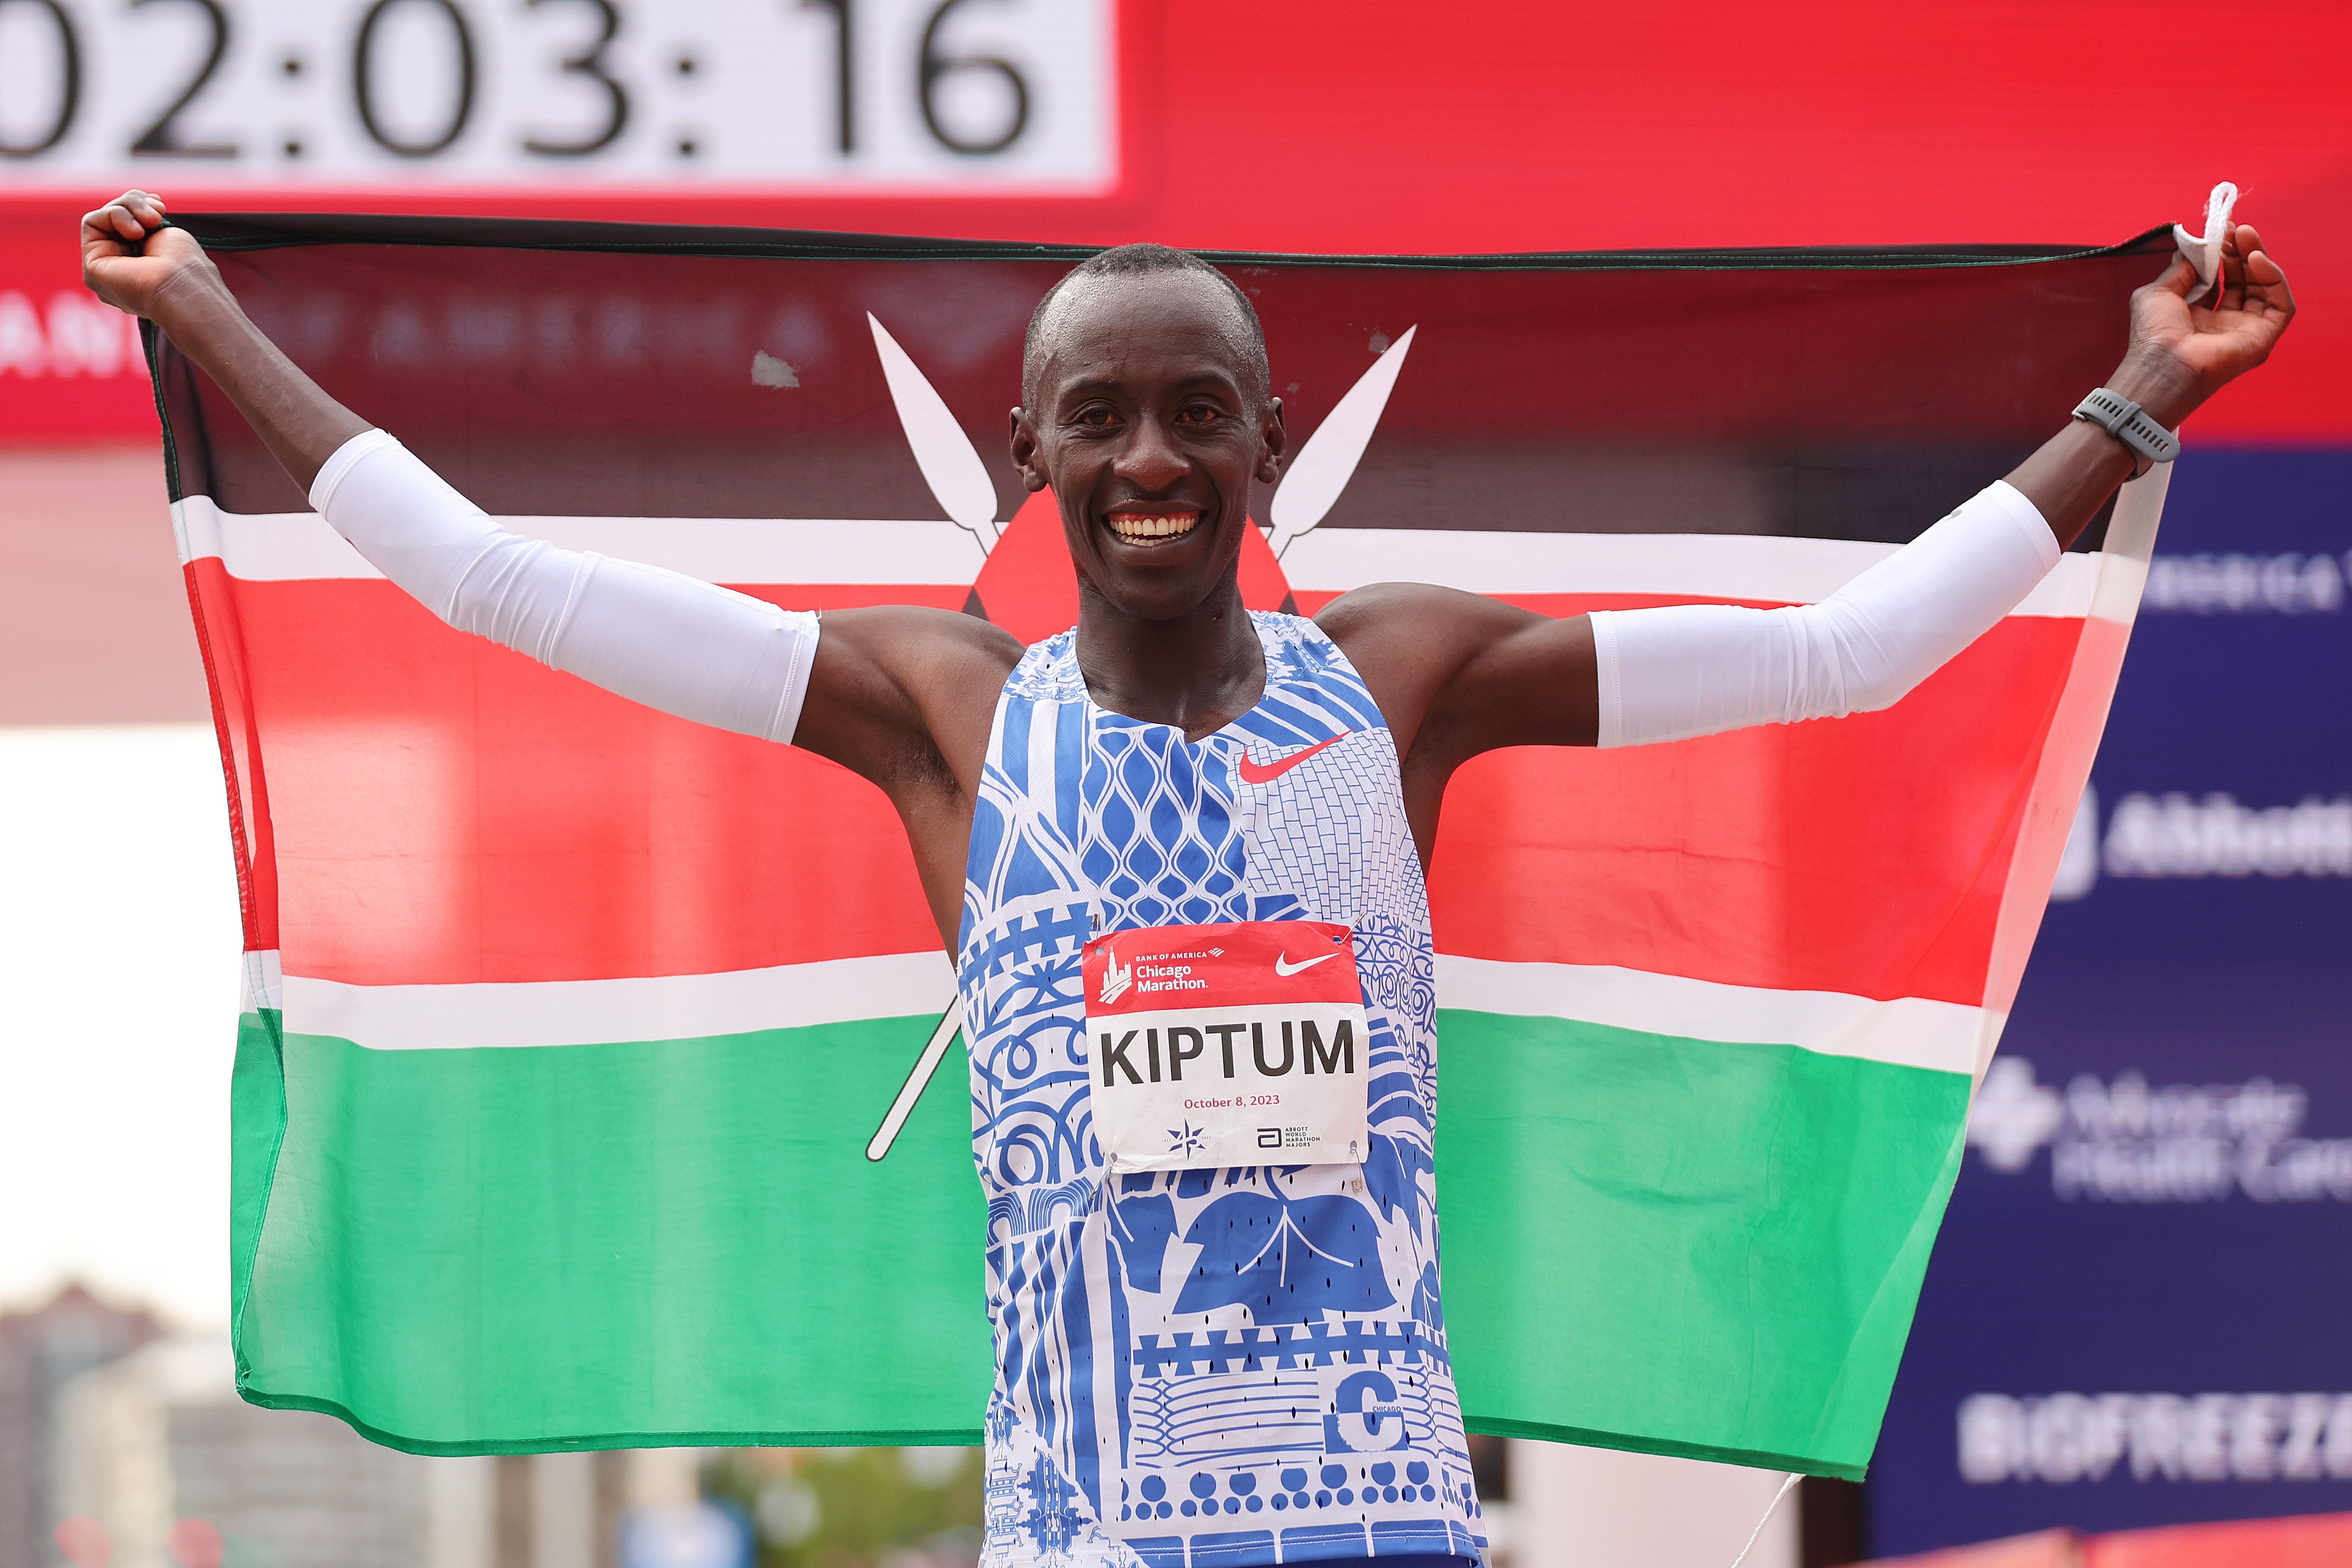 Kelvin Kiptum Runs Over 180 Miles Some Weeks, According to Coach